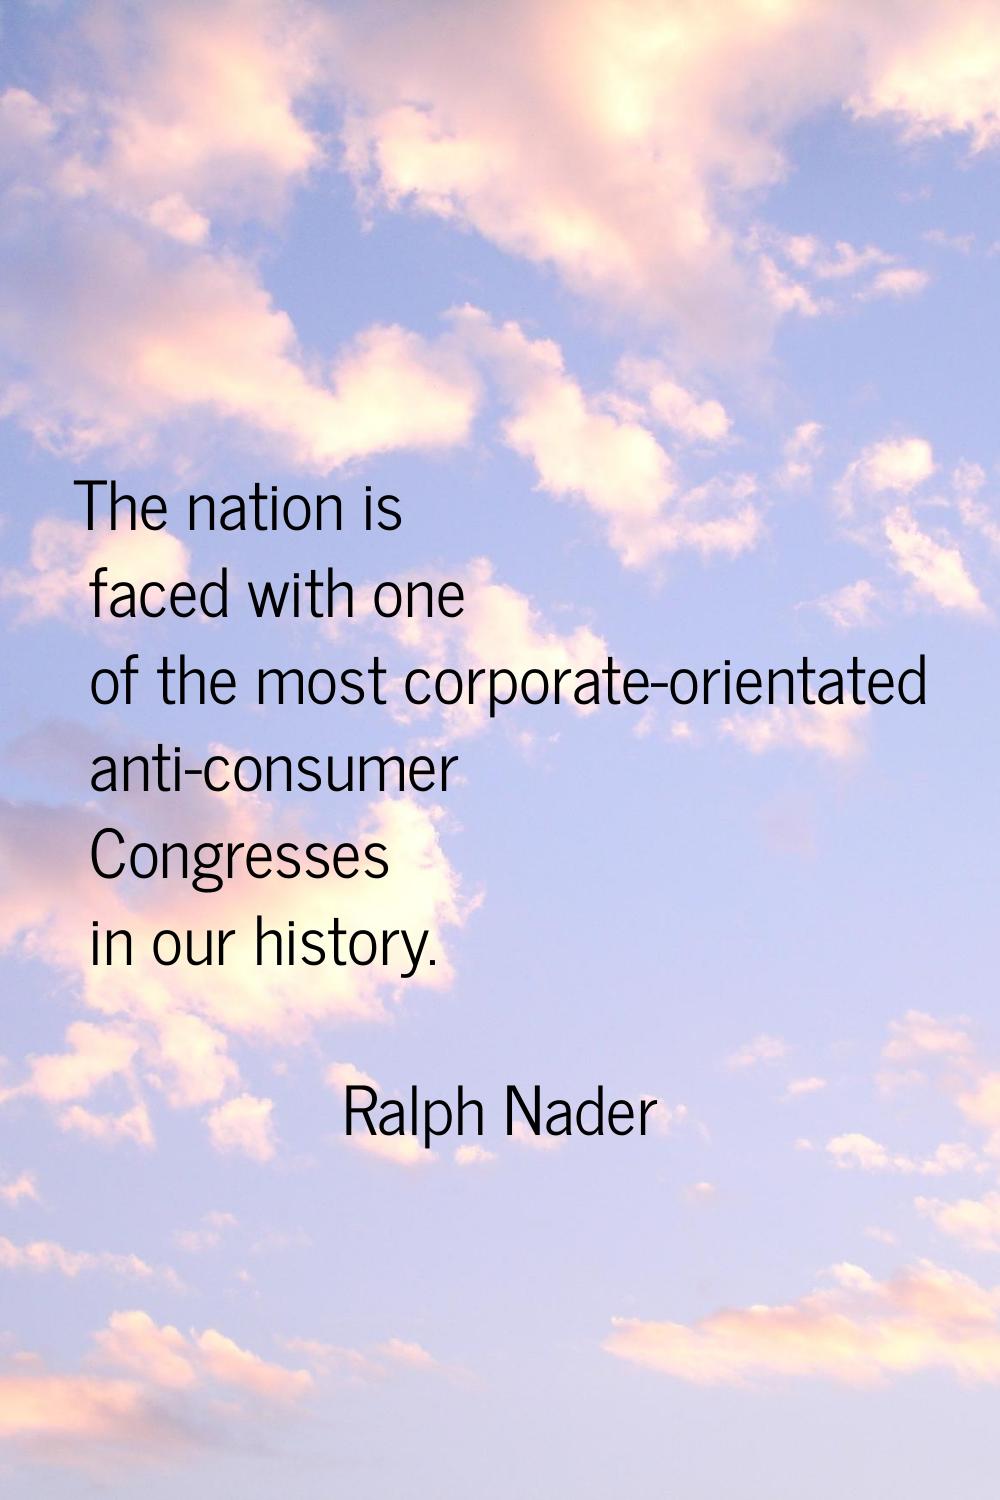 The nation is faced with one of the most corporate-orientated anti-consumer Congresses in our histo